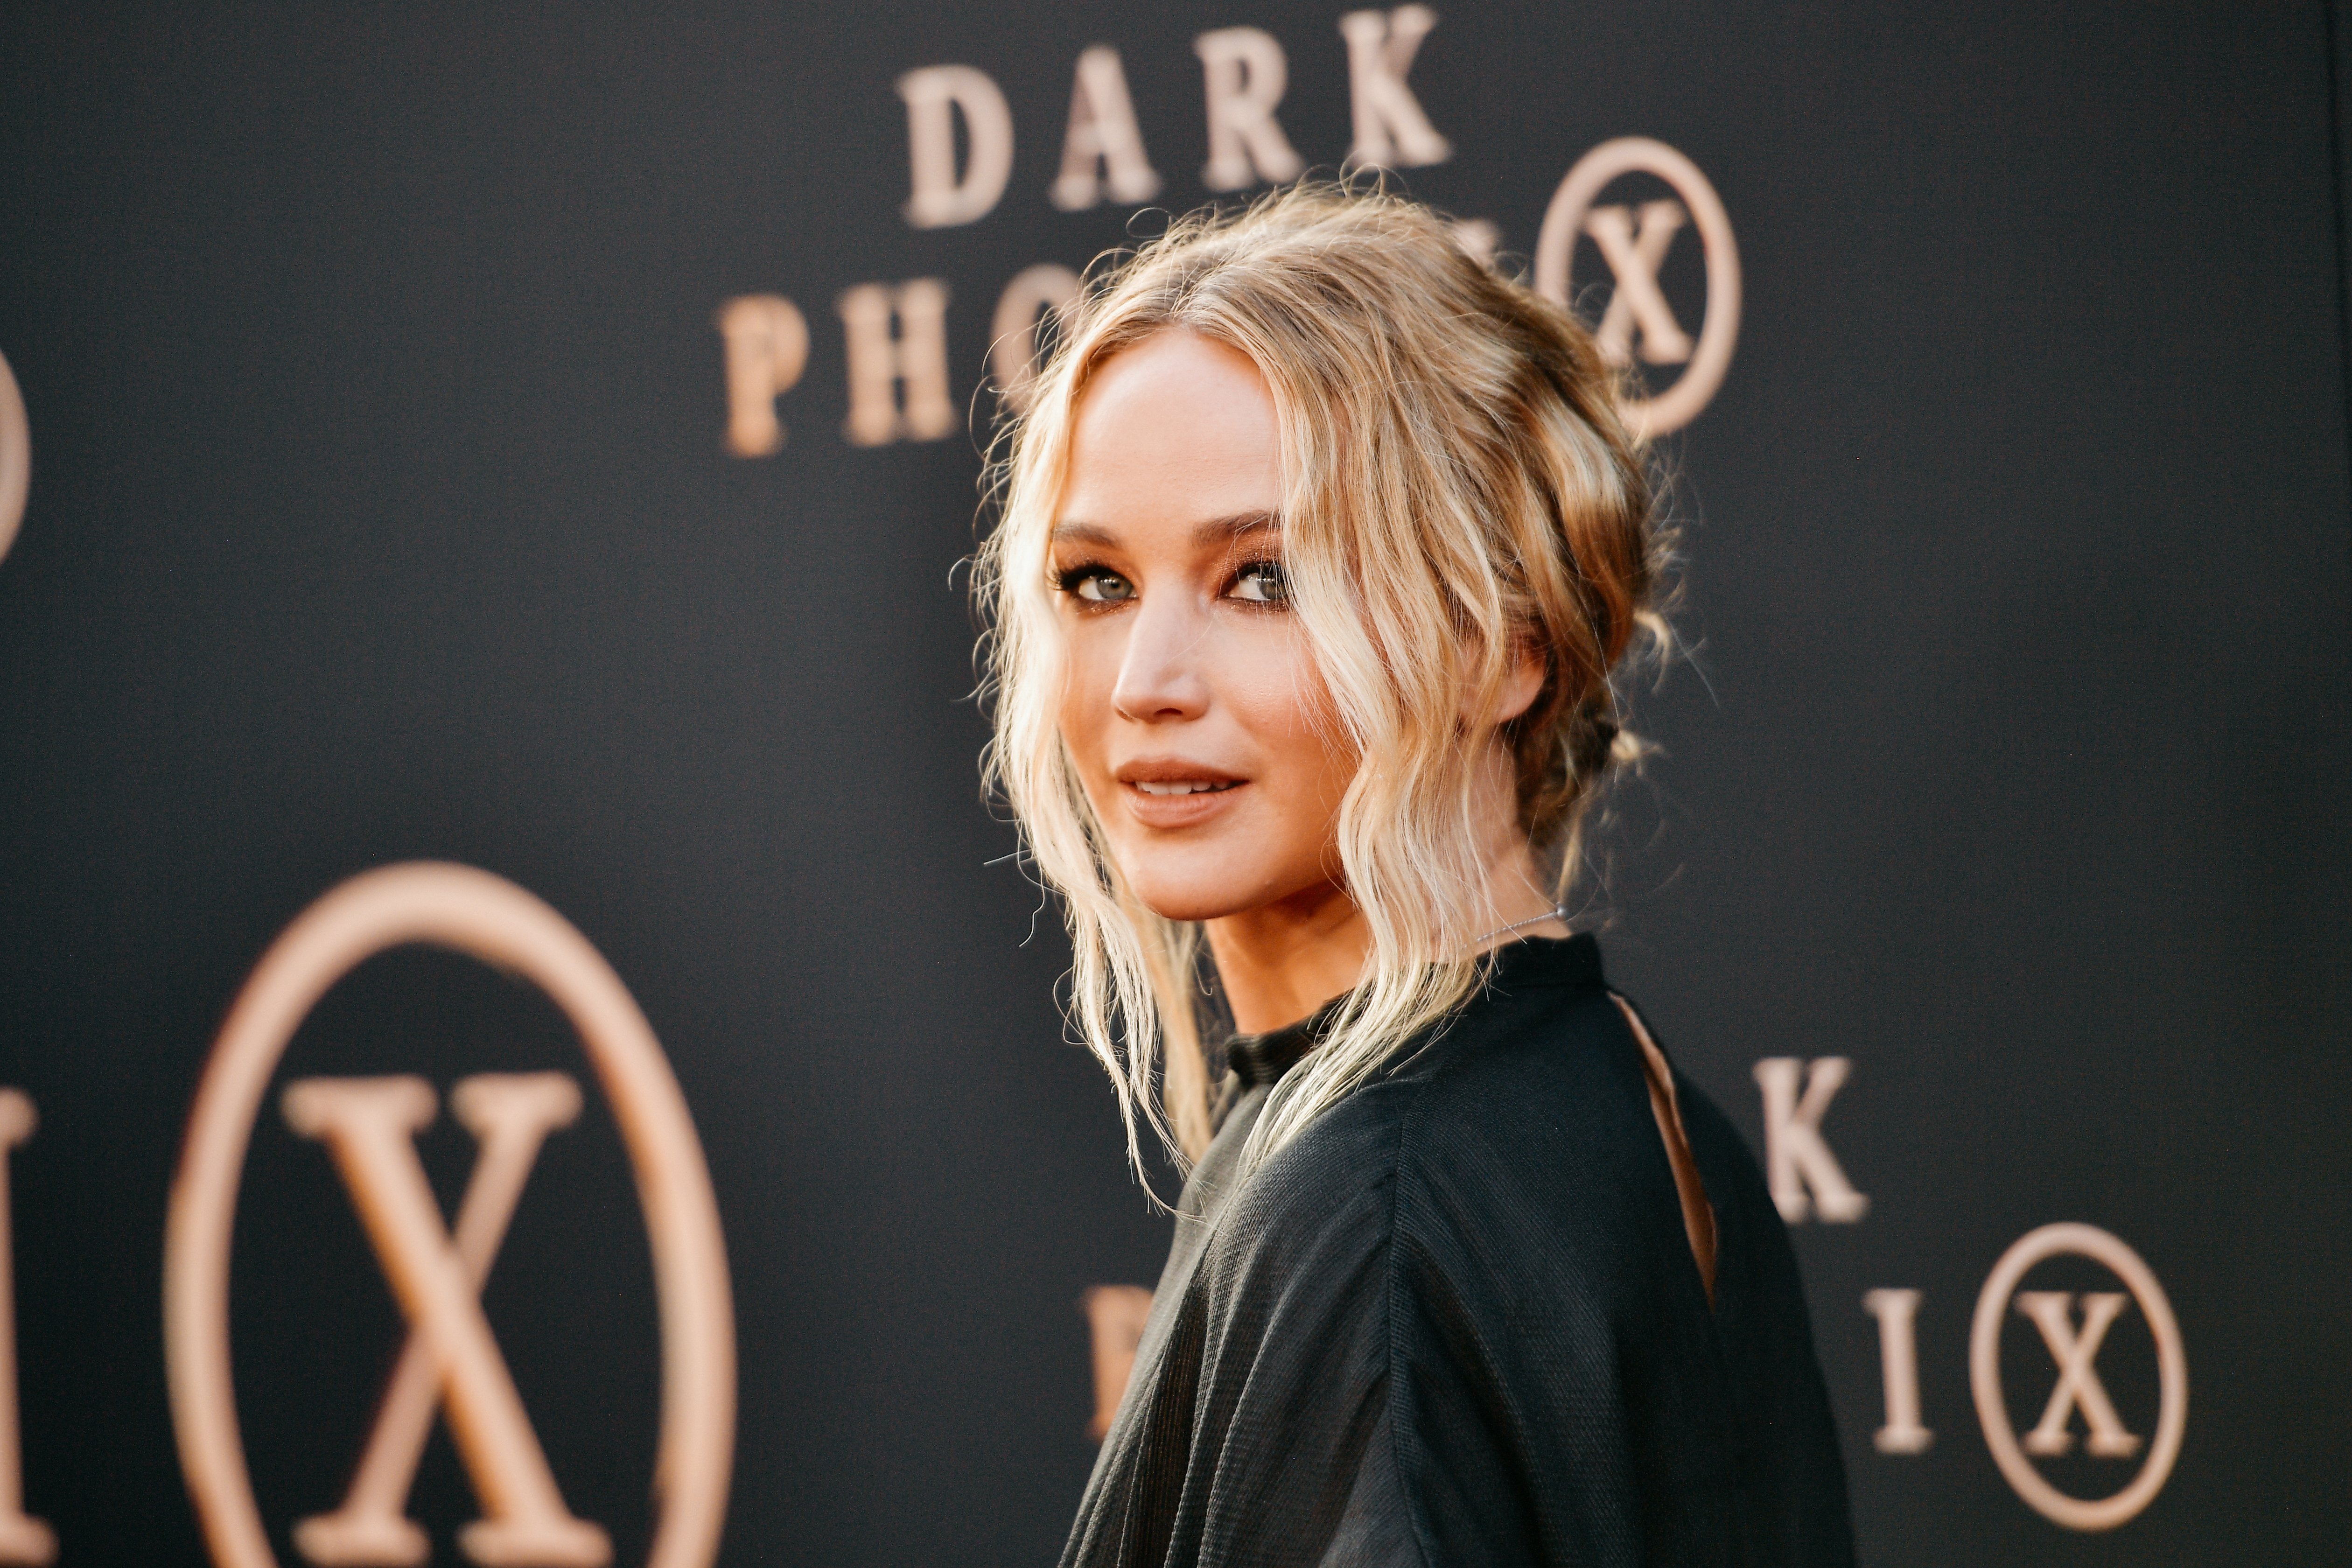 Jennifer Lawrence attends the premiere of "Dark Phoenix" in Hollywood, California on June 4, 2019 | Photo: Getty Images